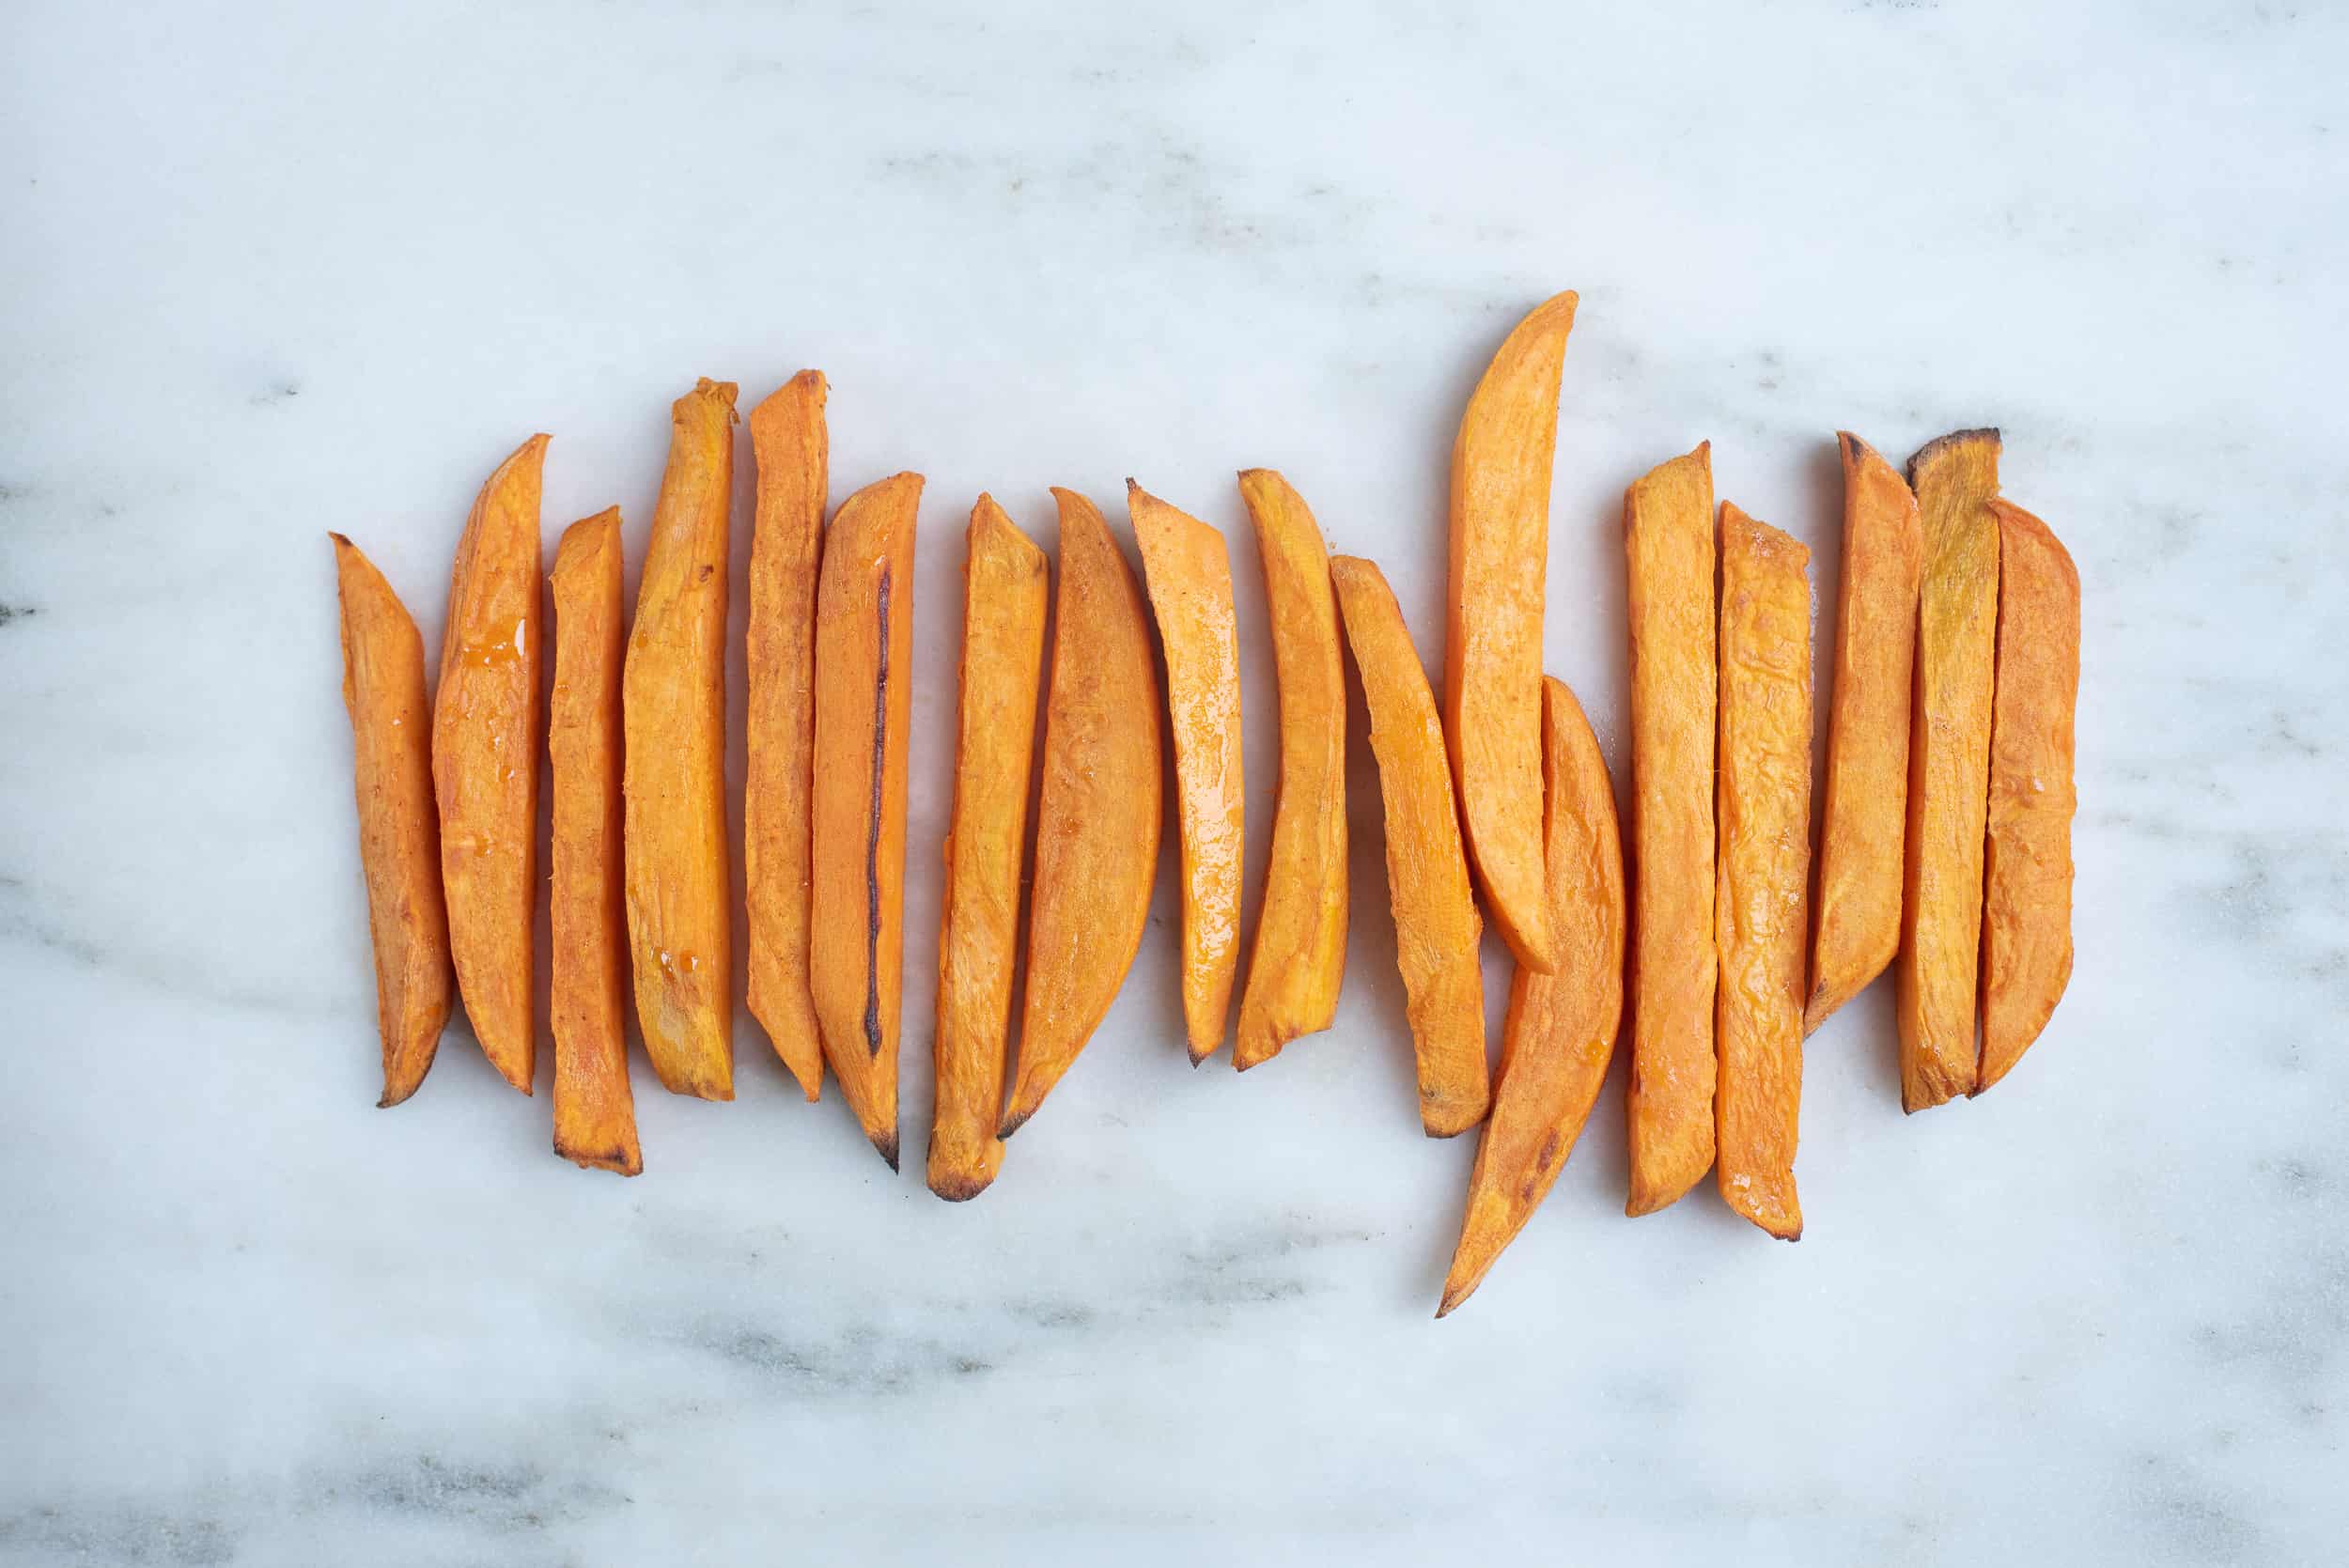 row of peeled, baked sweet potato fries lined up on countertop